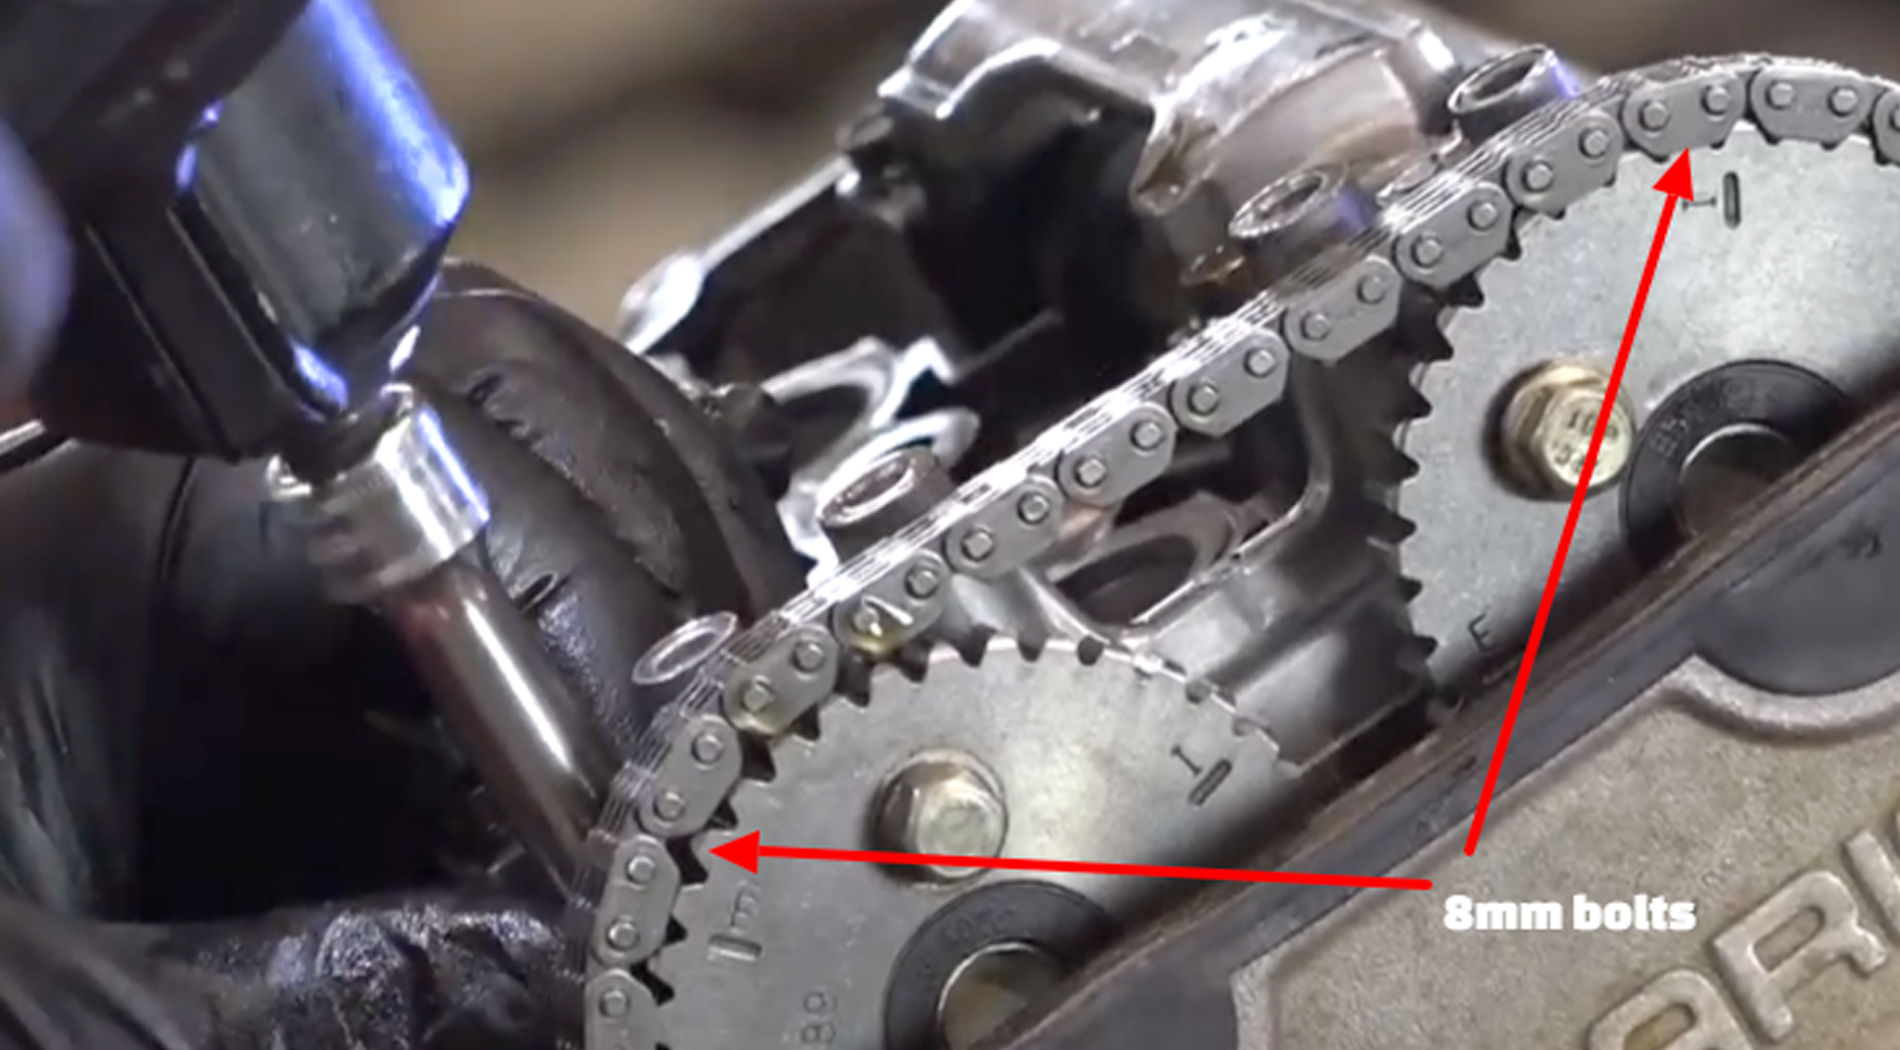 Polaris side-by-side cylinder head removal